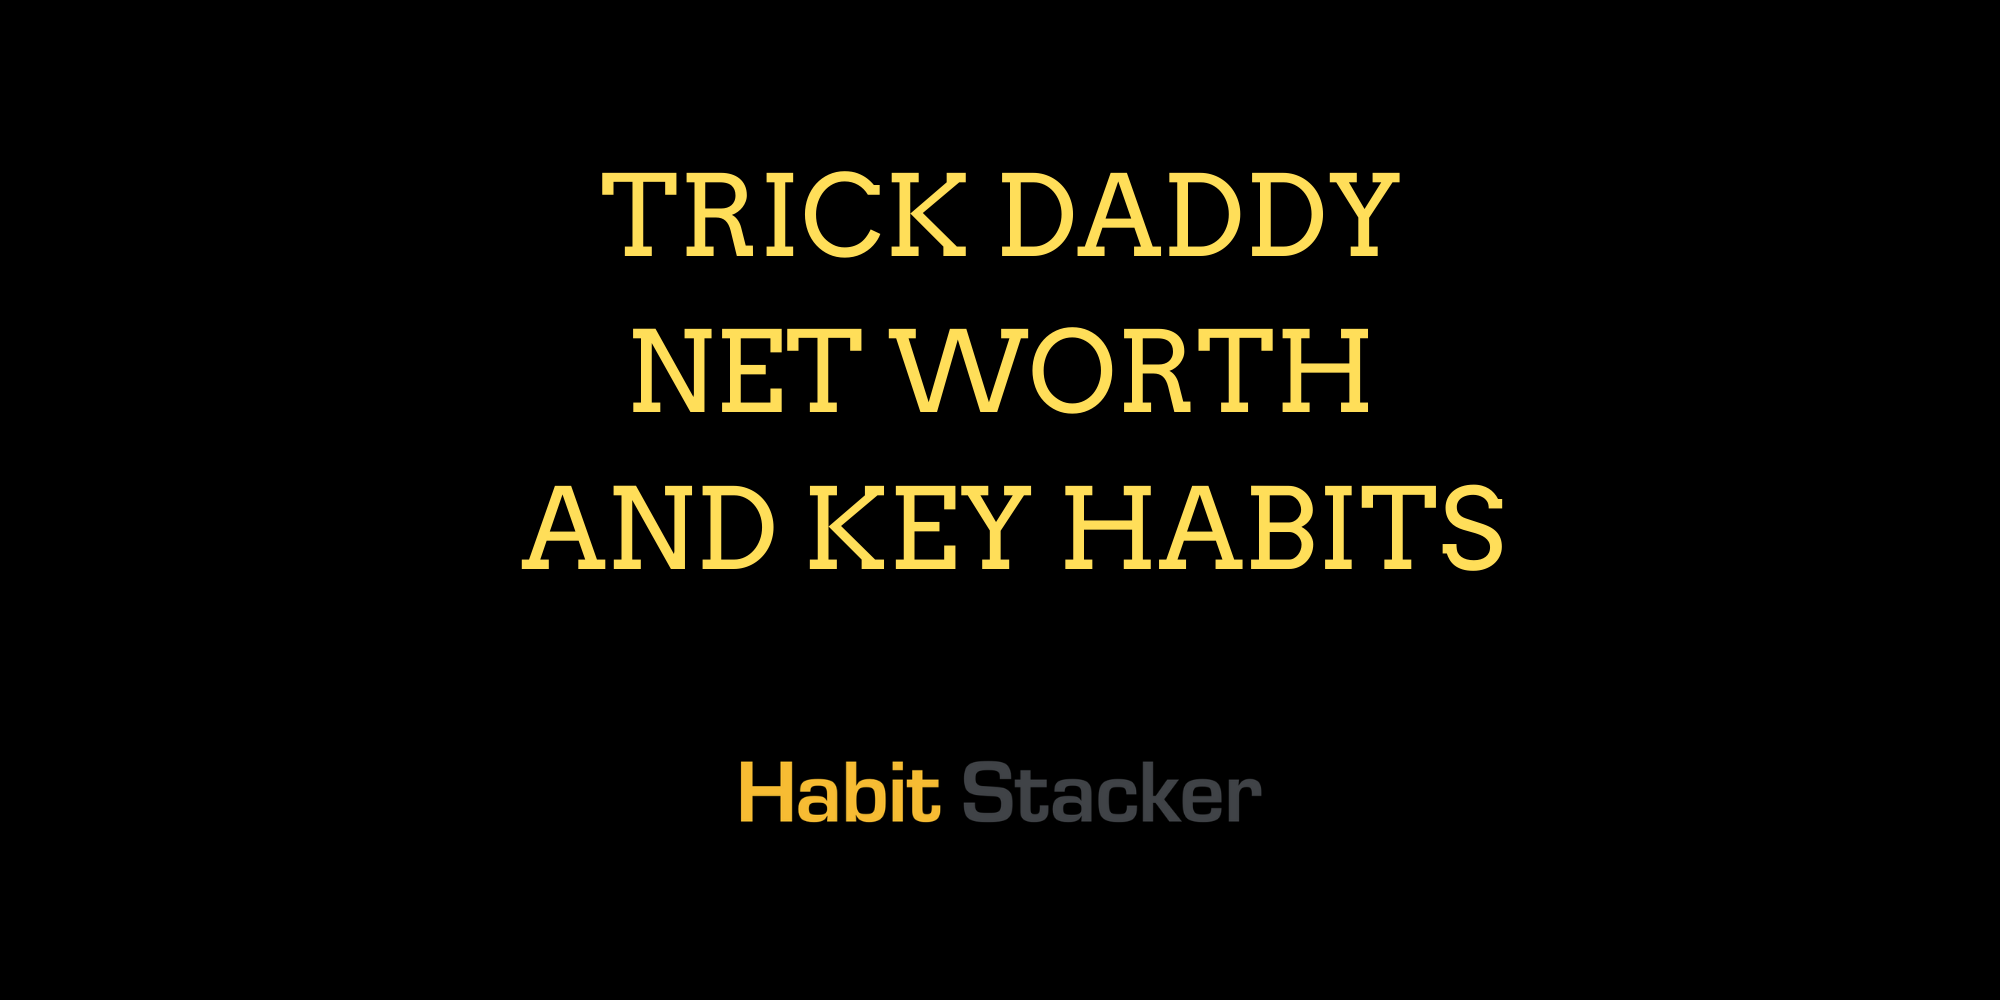 Trick Daddy Net Worth and Key Habits